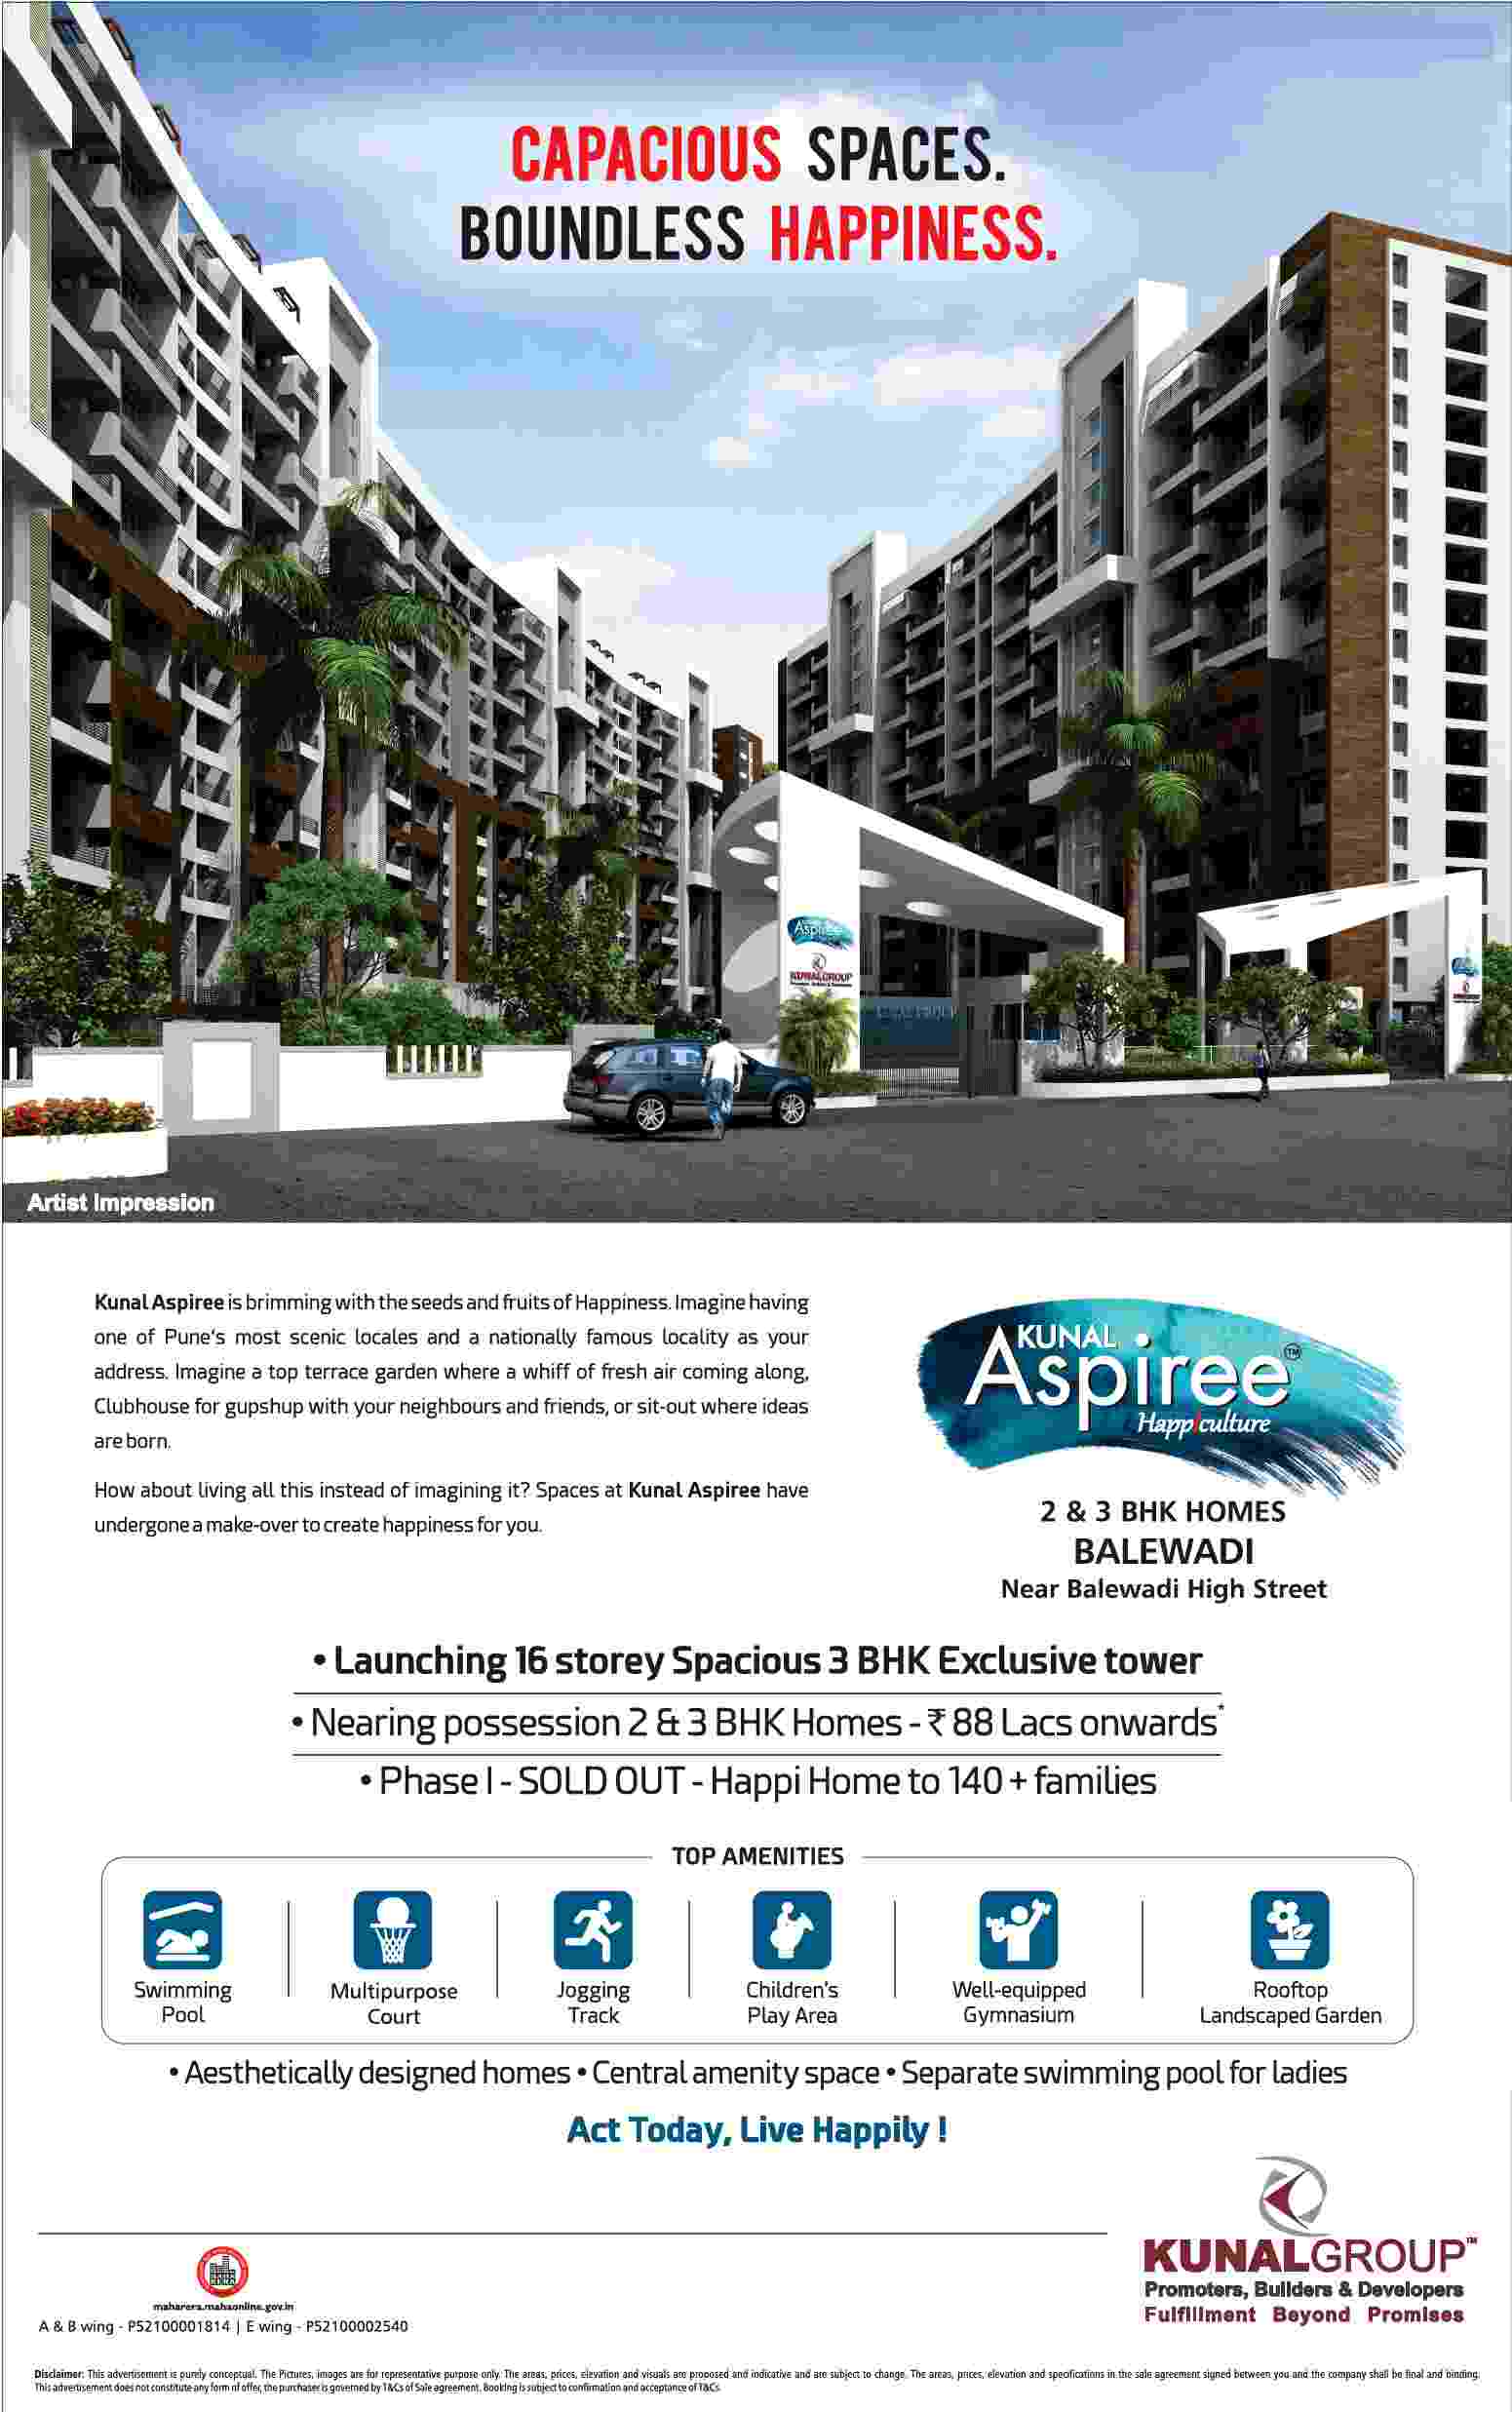 Kunal Aspiree nearing possession with 2 & 3 BHK homes in Pune Update